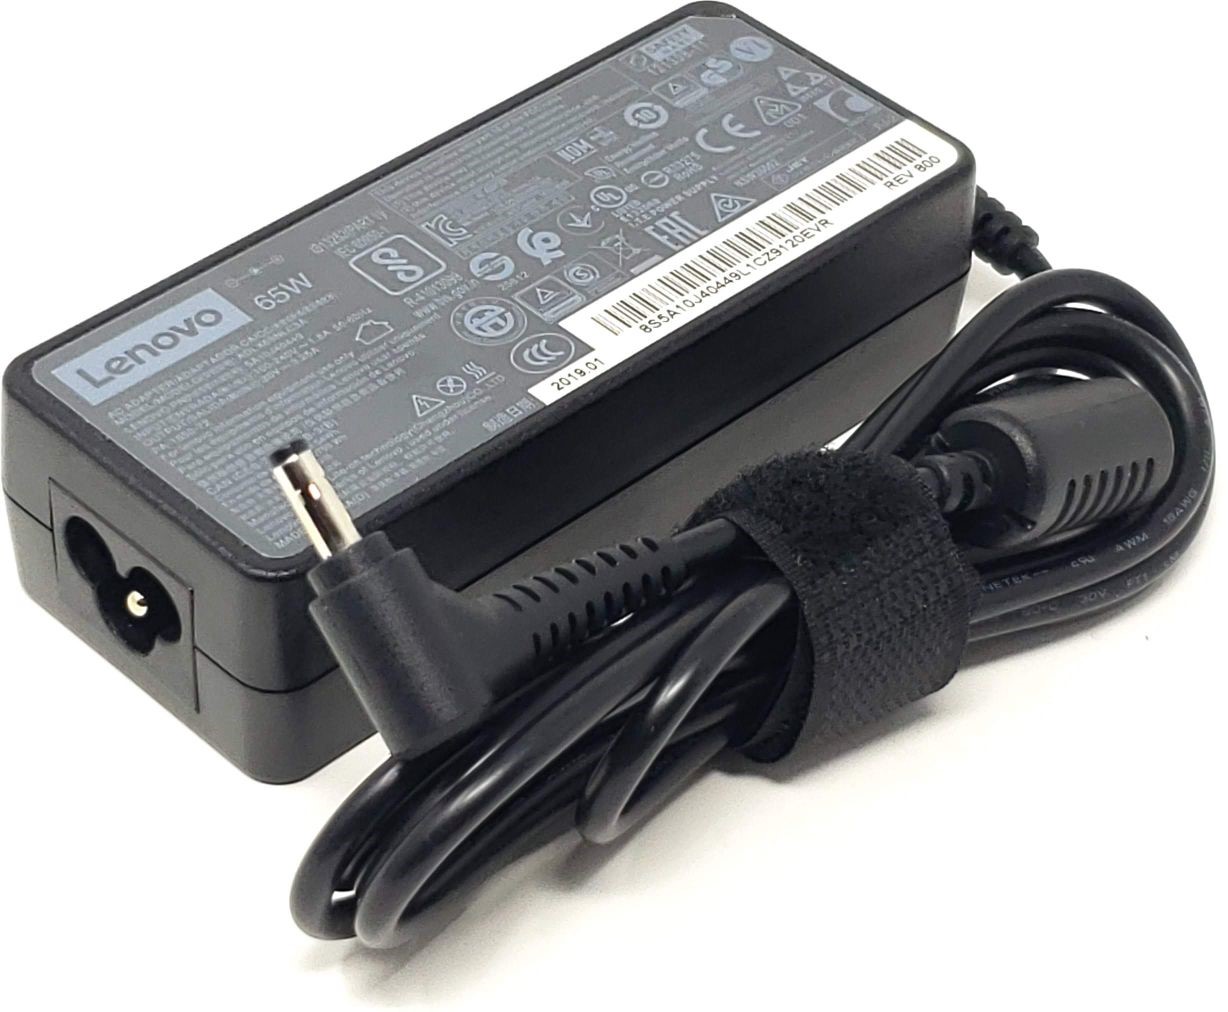 Lenovo 65W AC Power Adapter Charger (USB Type-C tip) - Overview and Service  Parts - Lenovo Support US